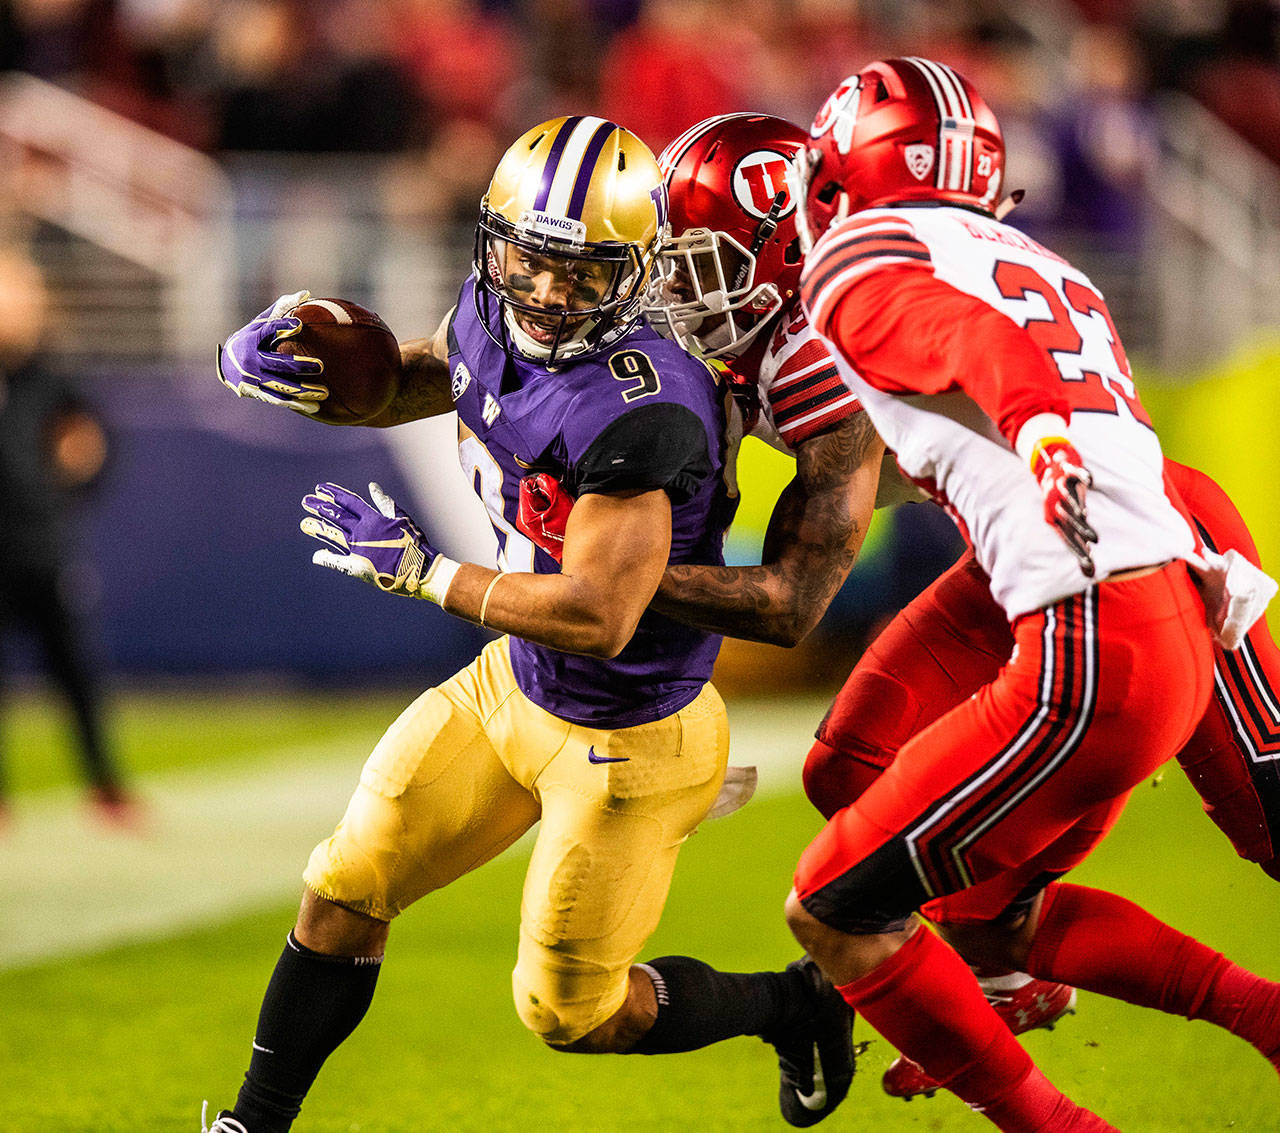 Myles Gaskin had 50-yards rushing in the first half, but the Huskies could get into the end zone against Utah.The 11th-ranked Washington Huskies played the 17th-ranked Utah Utes in the Pac-12 Championship game at Levi’s Stadium in Santa Clara, CA, Friday November 30, 2018. (Dean Rutz/The Seattle Times/TNS)